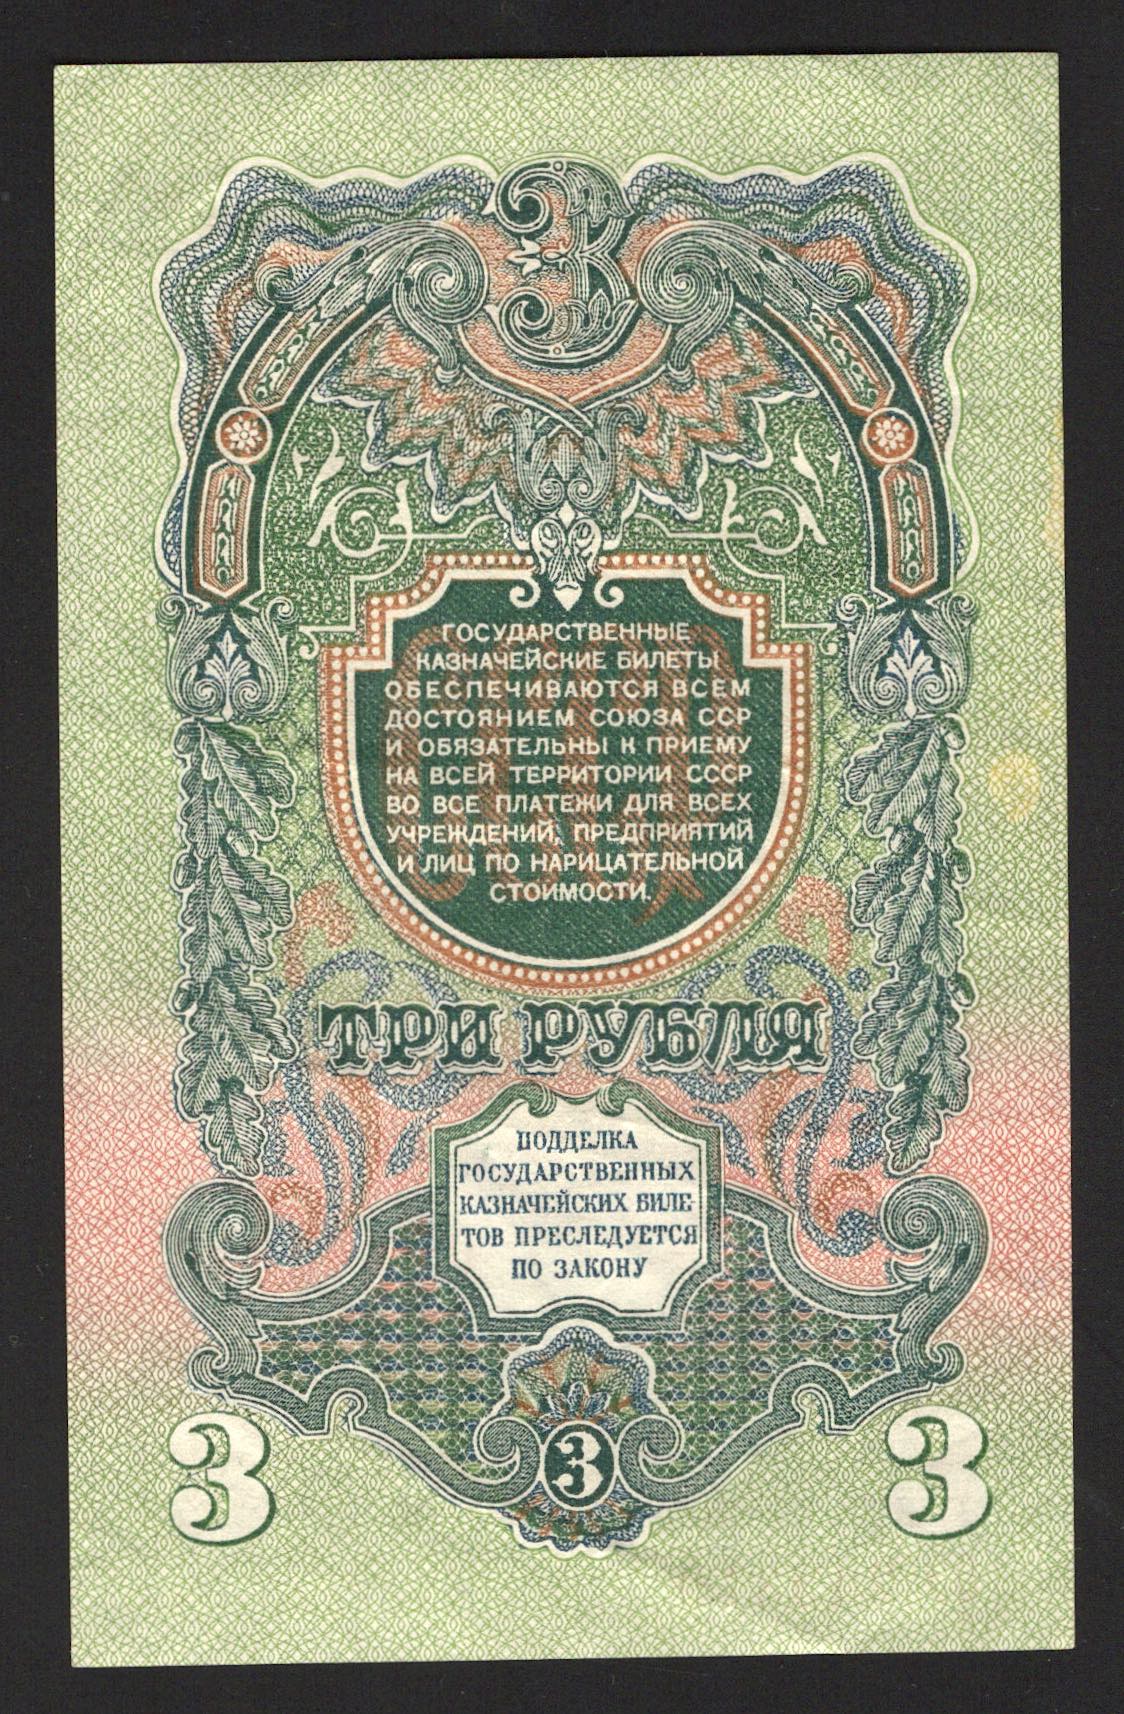 Russia - USSR 3 Roubles 1947